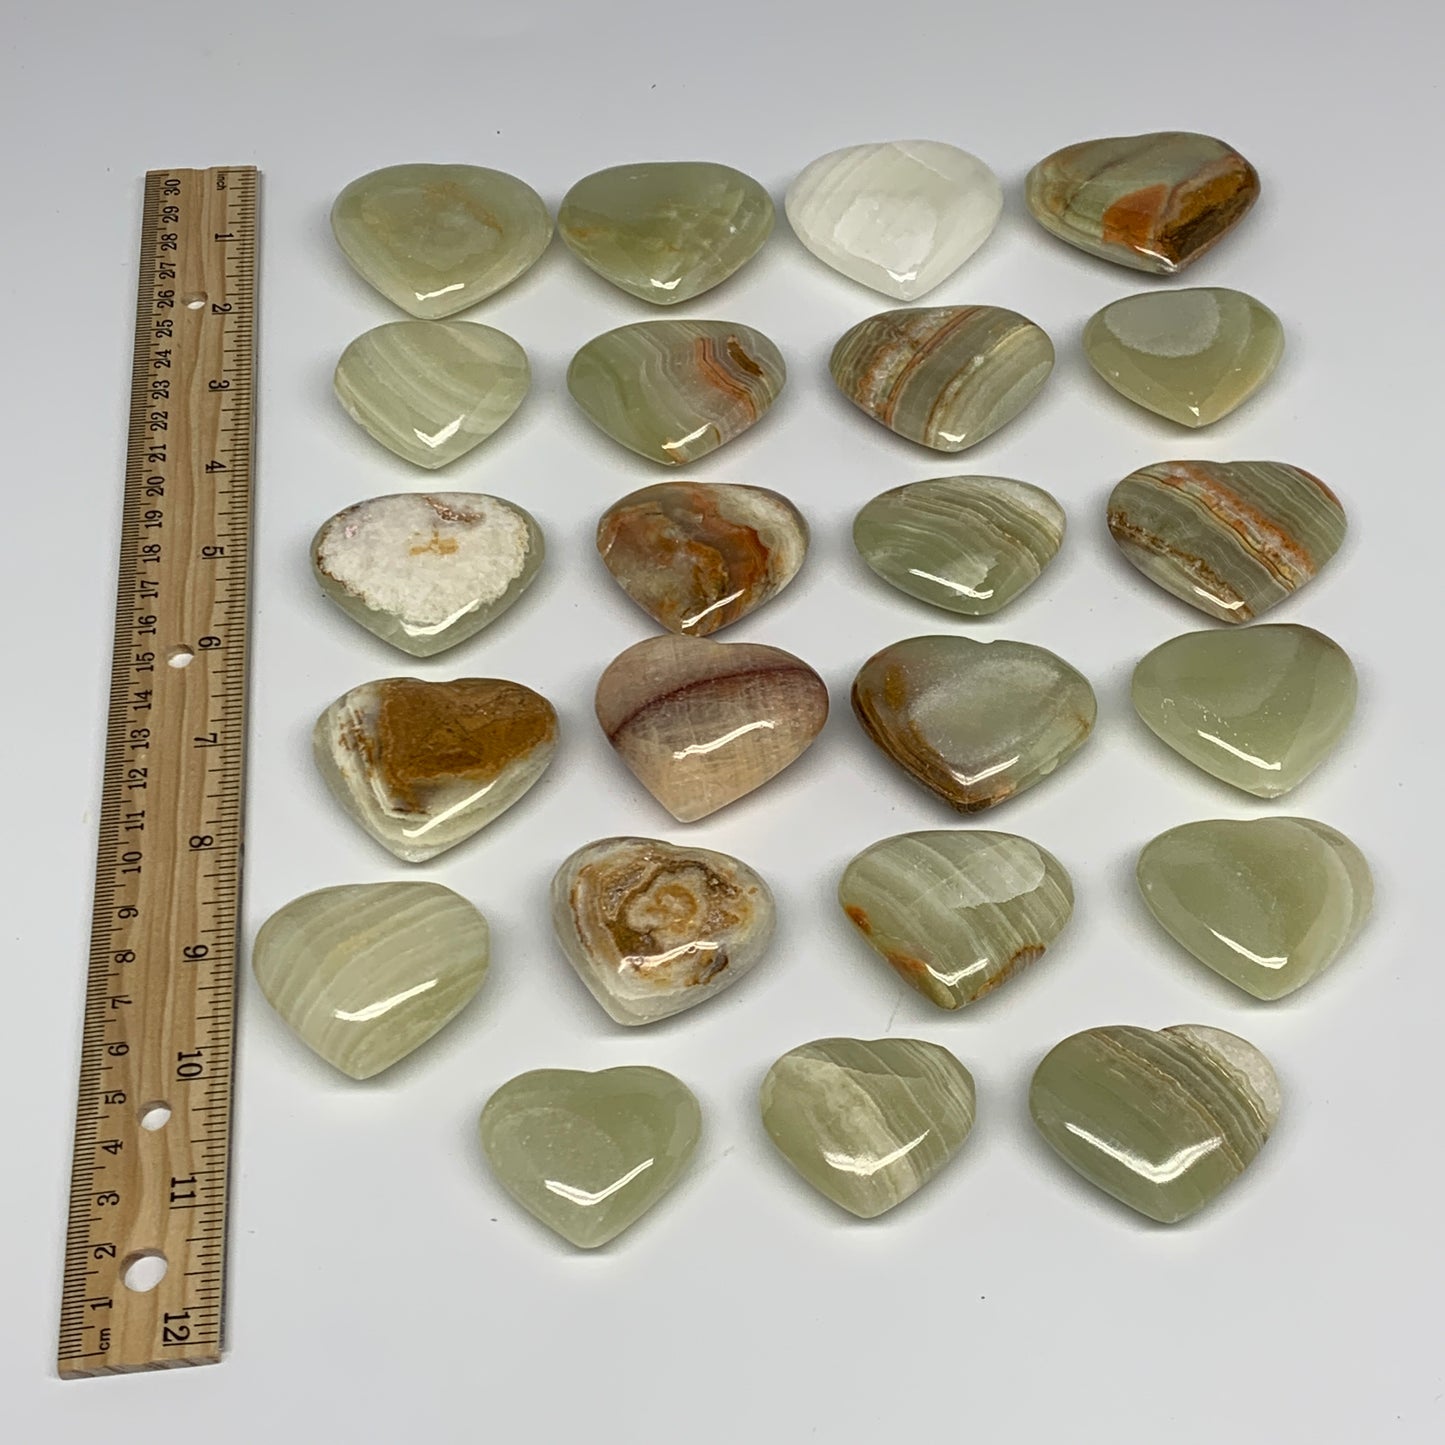 1000g (2.2 lbs) ,23 pcs, 1.3"- 1.9", Green Onyx Hearts from Afghanistan, B26640